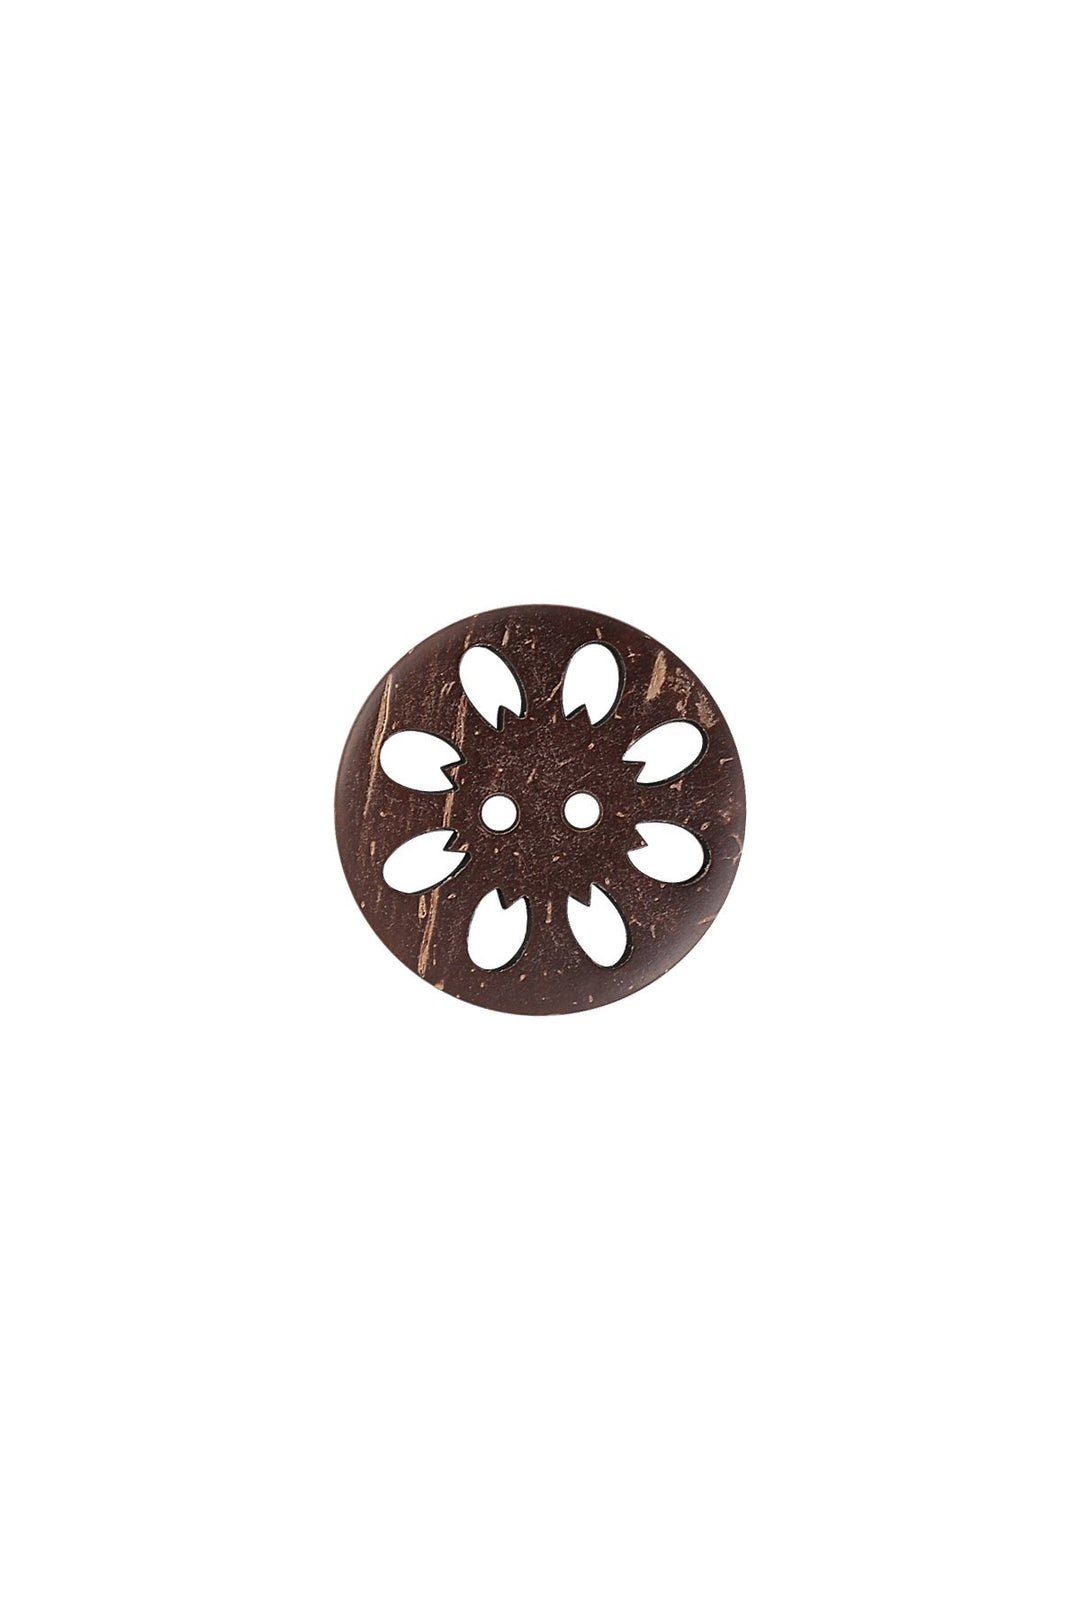 Cutwork Design Round Shape 2-Hole Brown Coco Buttons